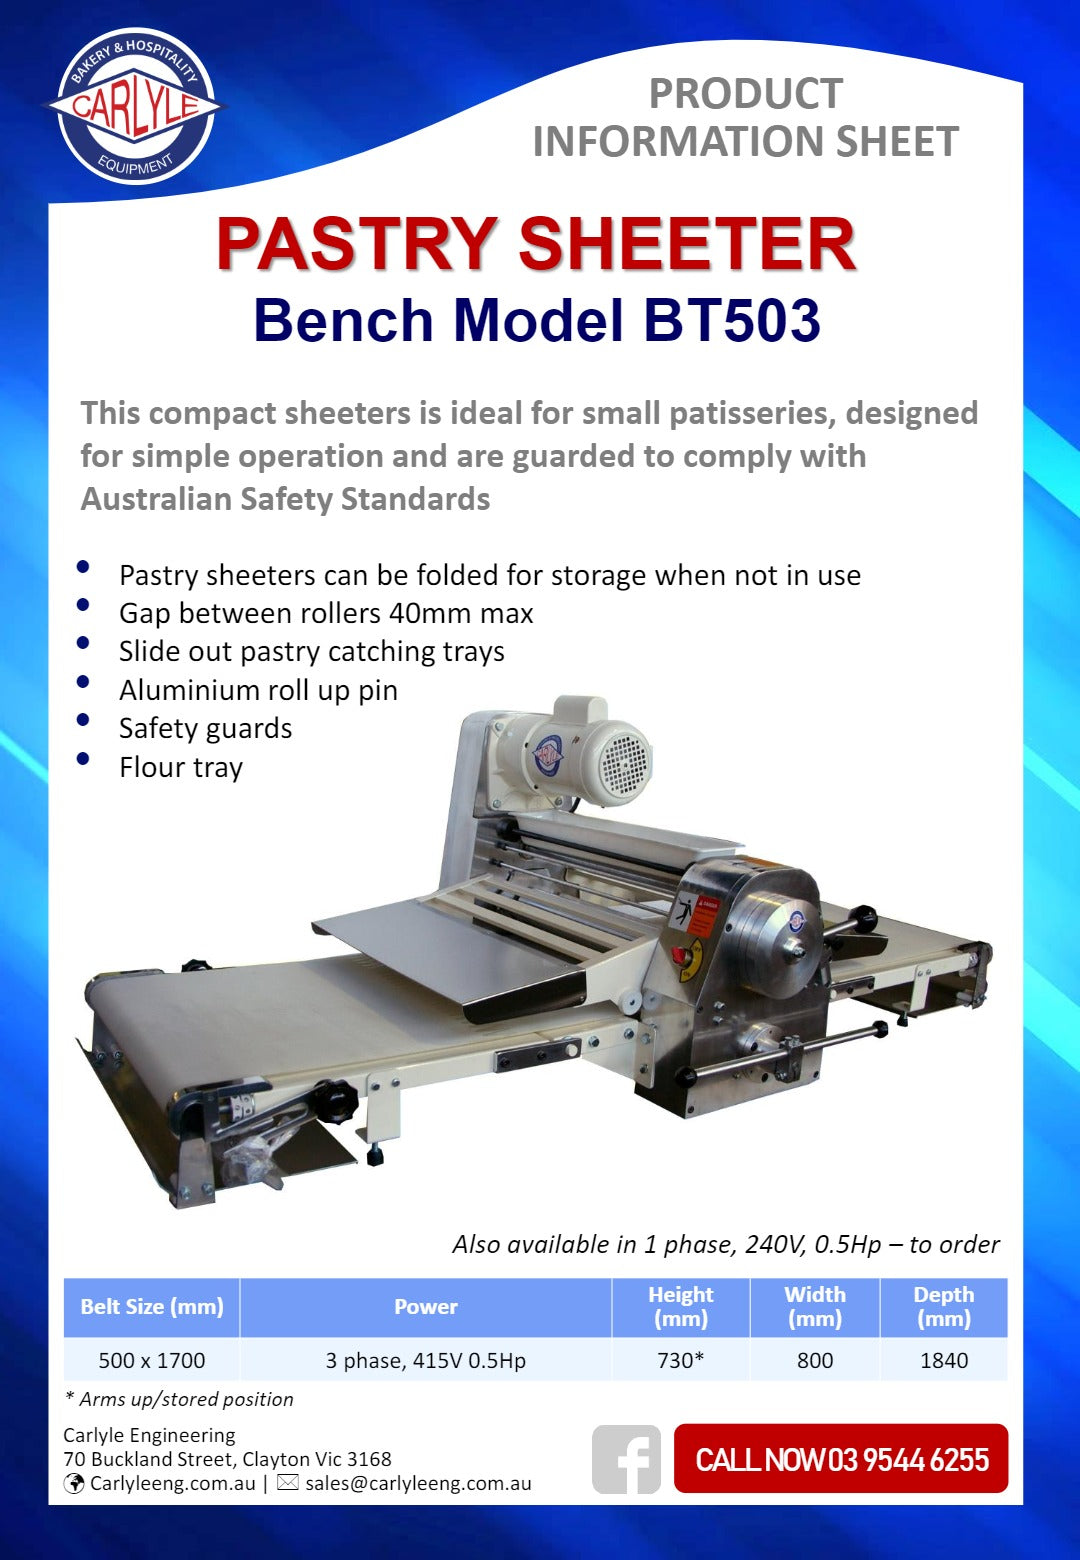 Thumbnail - Carlyle BT503 - Pastry Sheeter